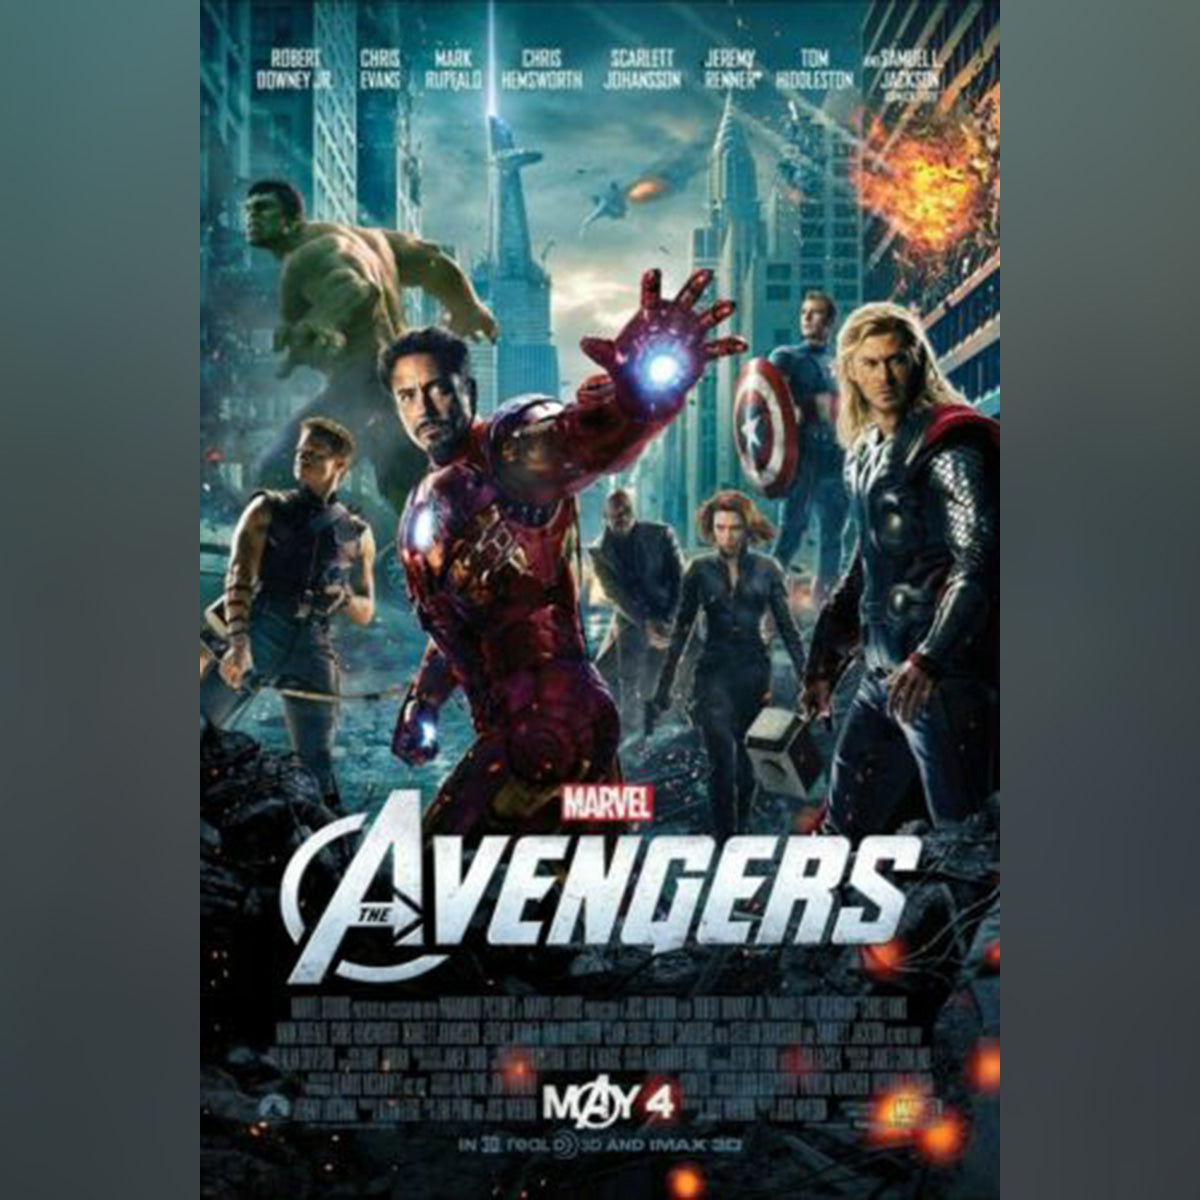 Original Movie Poster of Avengers, The (2012)